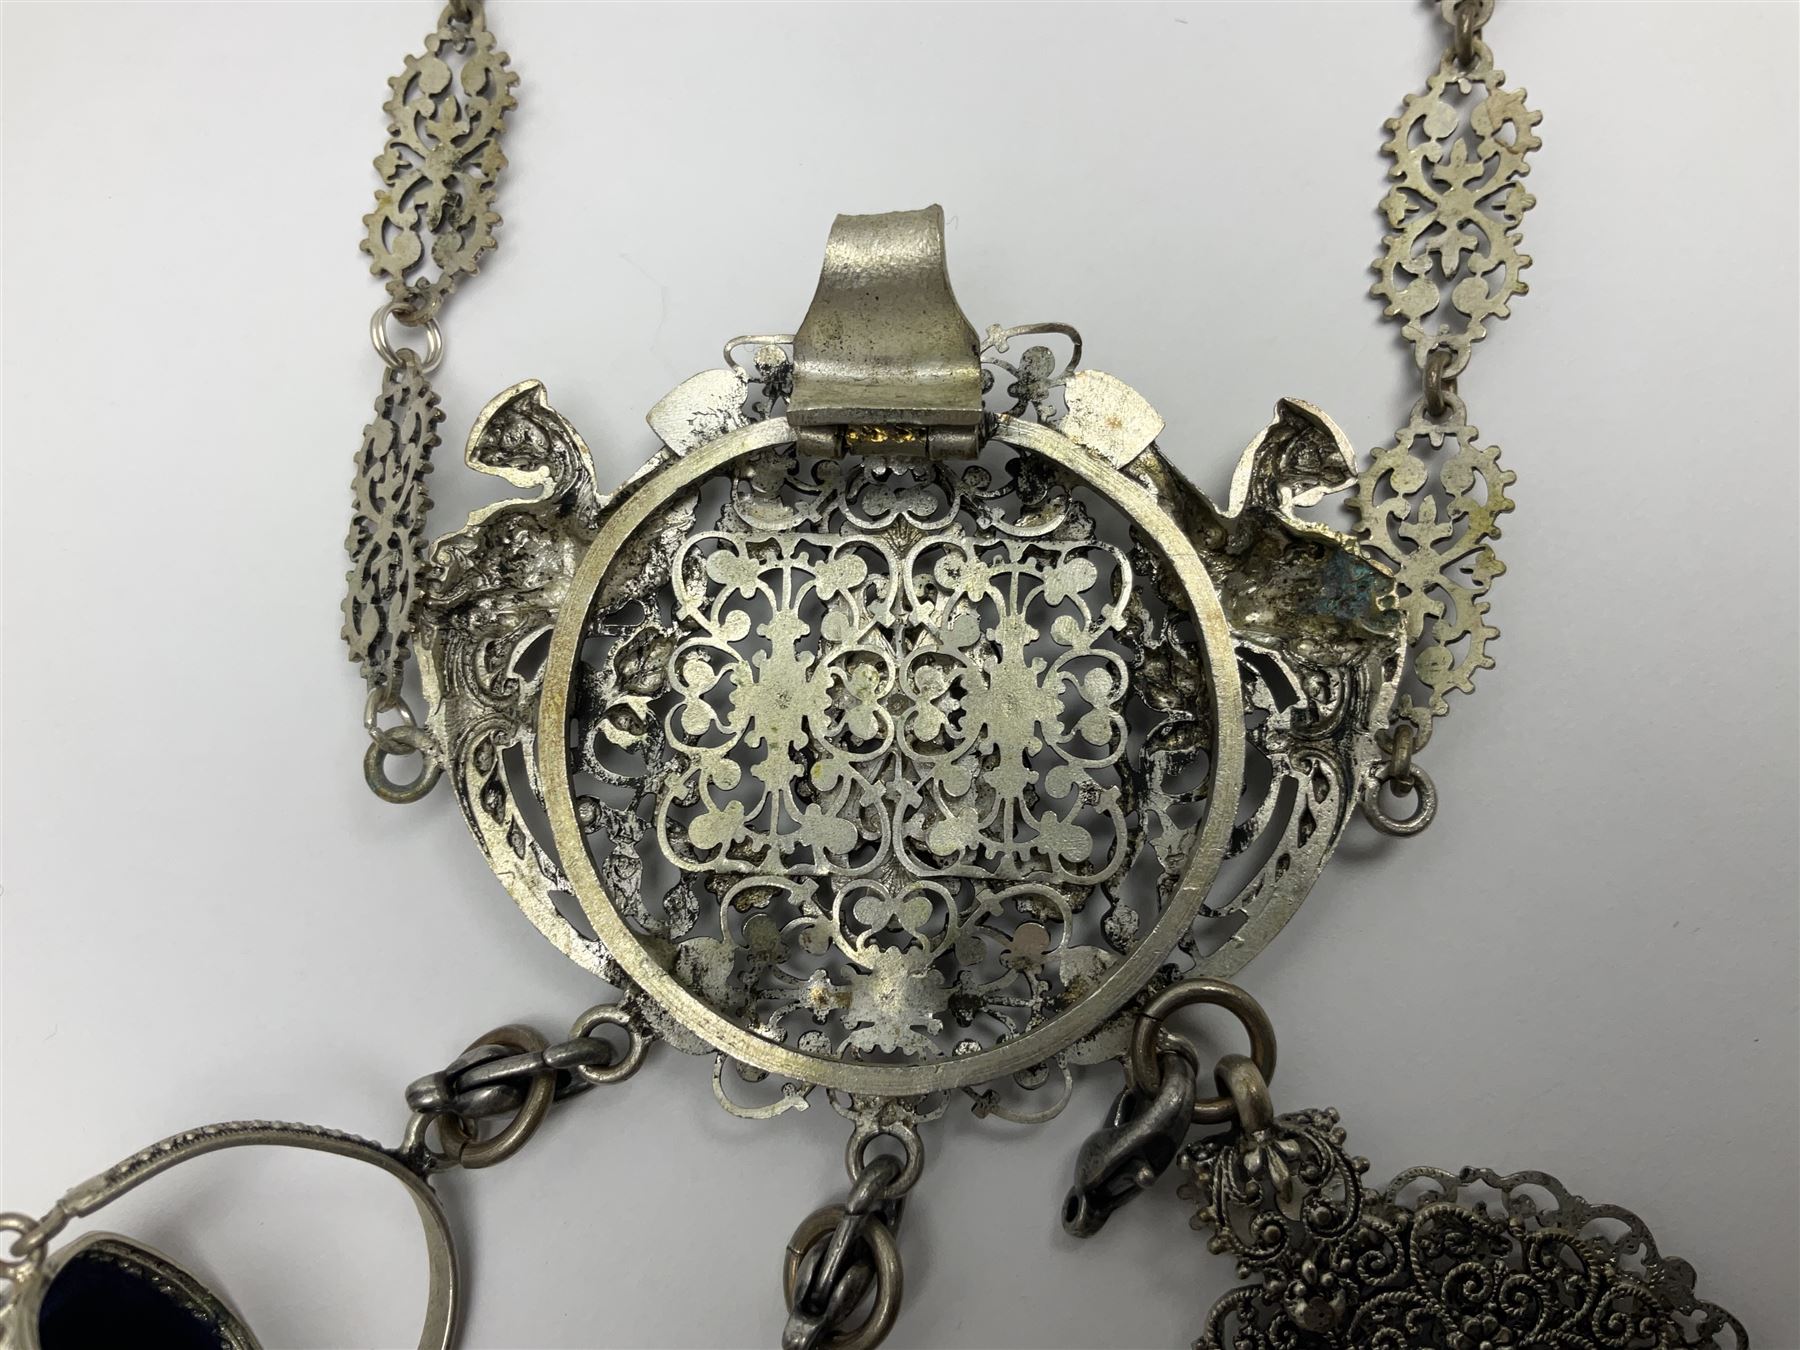 19th century continental silver plated chatelaine - Image 10 of 15